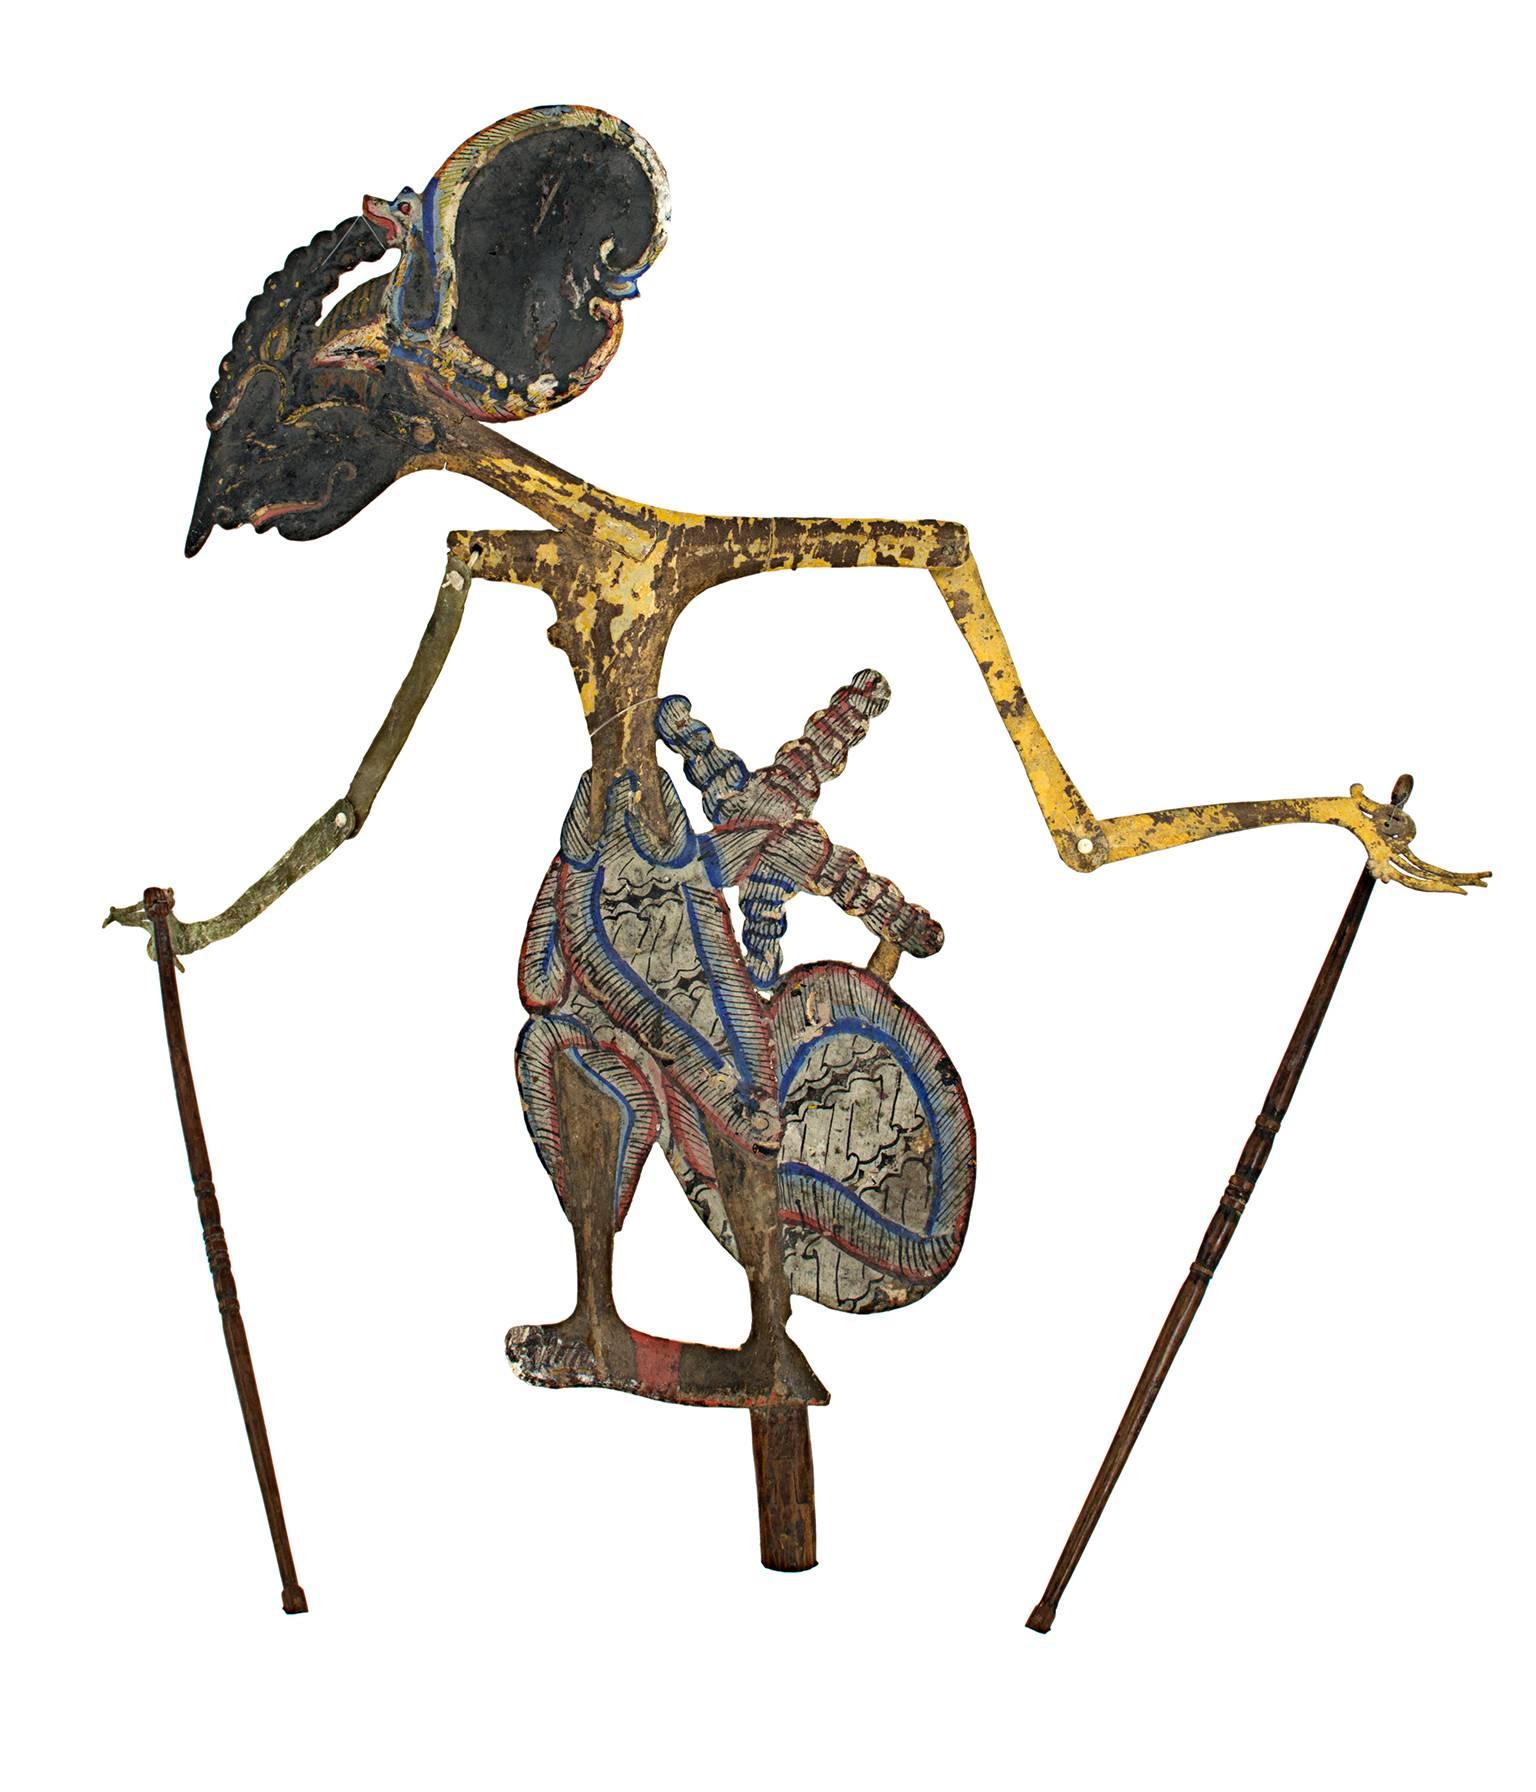 Unknown Figurative Sculpture - "Flat Wooden Shadow Puppet, " Wood & Leather created in Indonesia in the 19th C